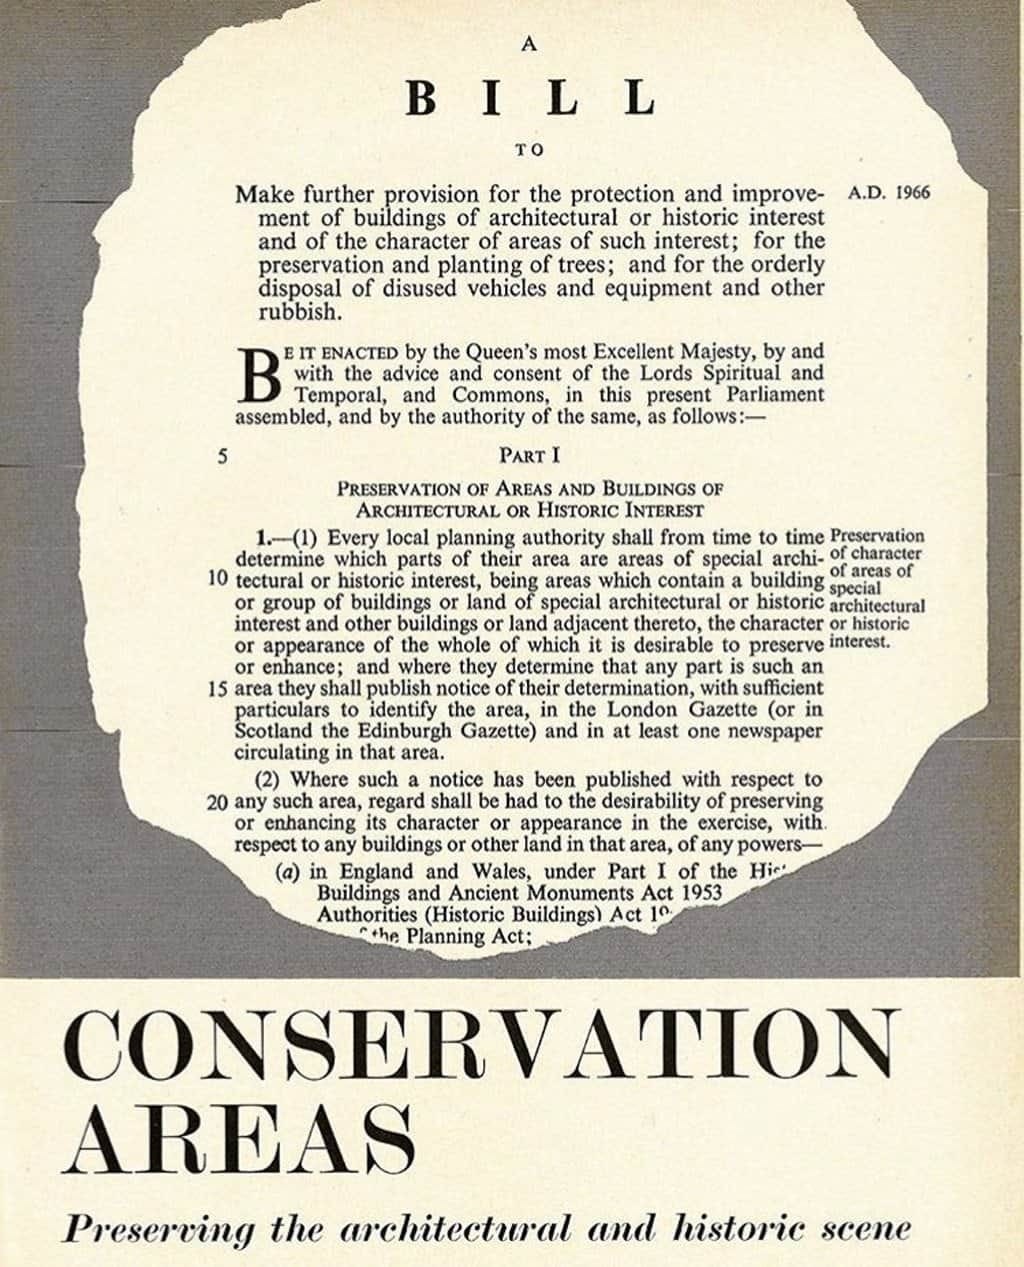 Historic document from 1966 titled 'A BILL' relating to Conservation Areas, outlining provisions for the protection of architectural or historic buildings and the enhancement of such areas, including tree preservation and disposal of disused items, to maintain the UK's architectural and historic scene.